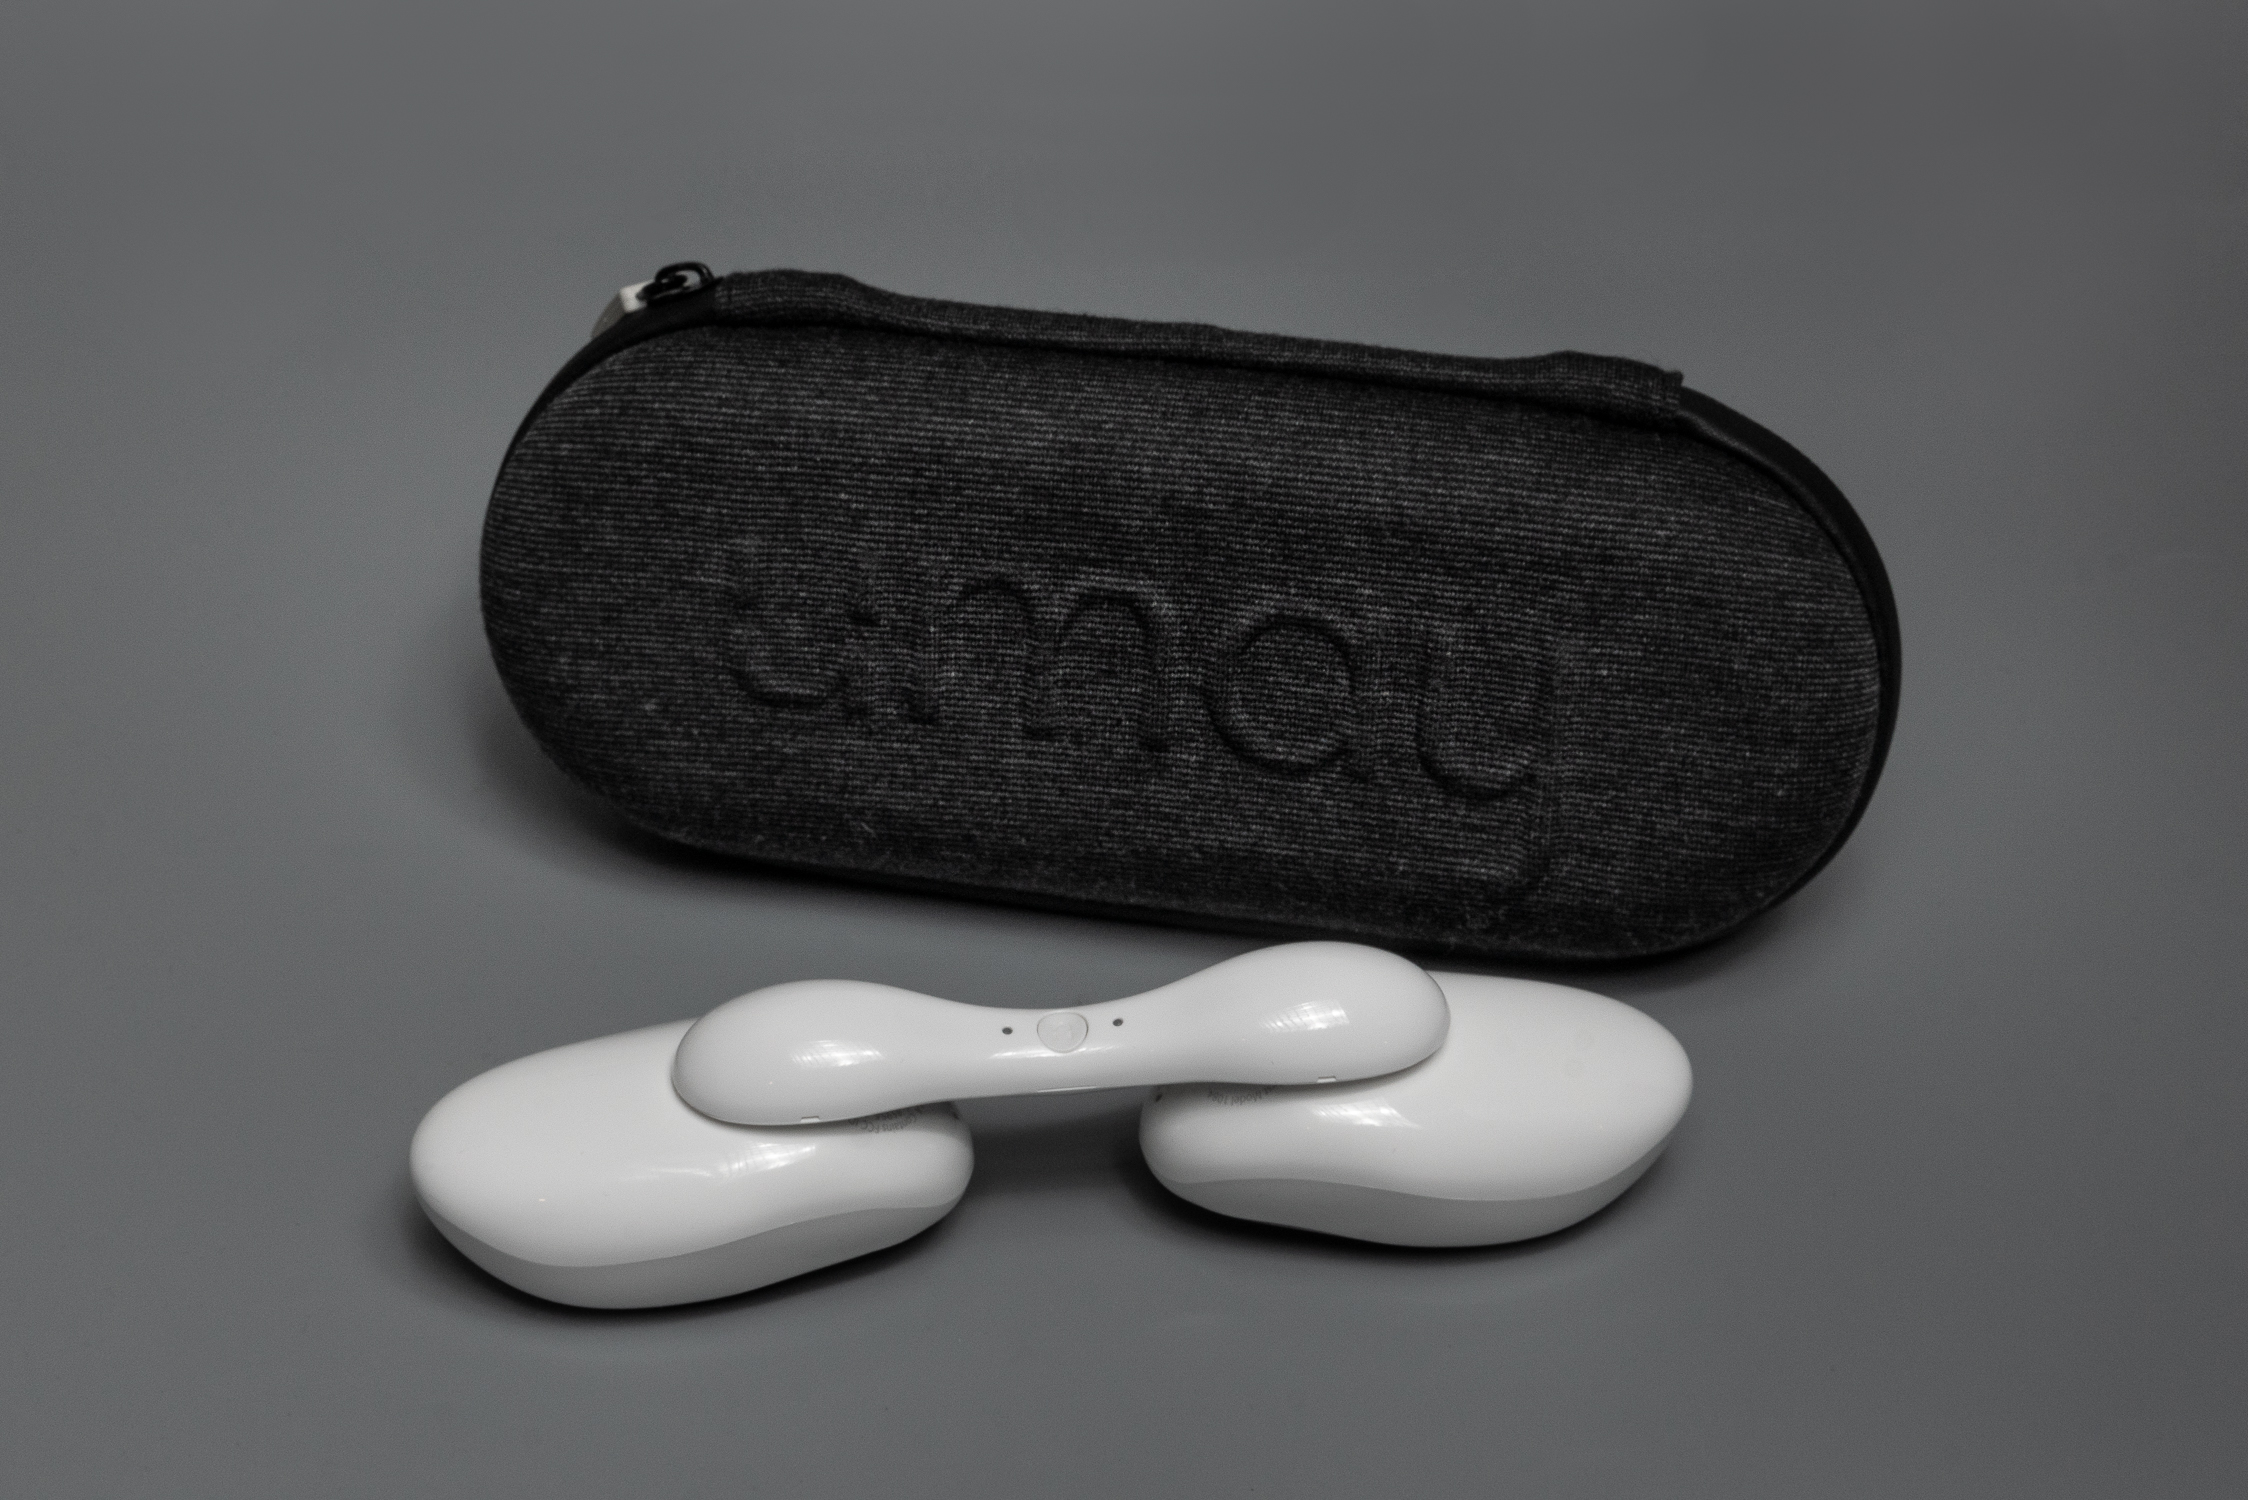 Umay REST device with black carrying case